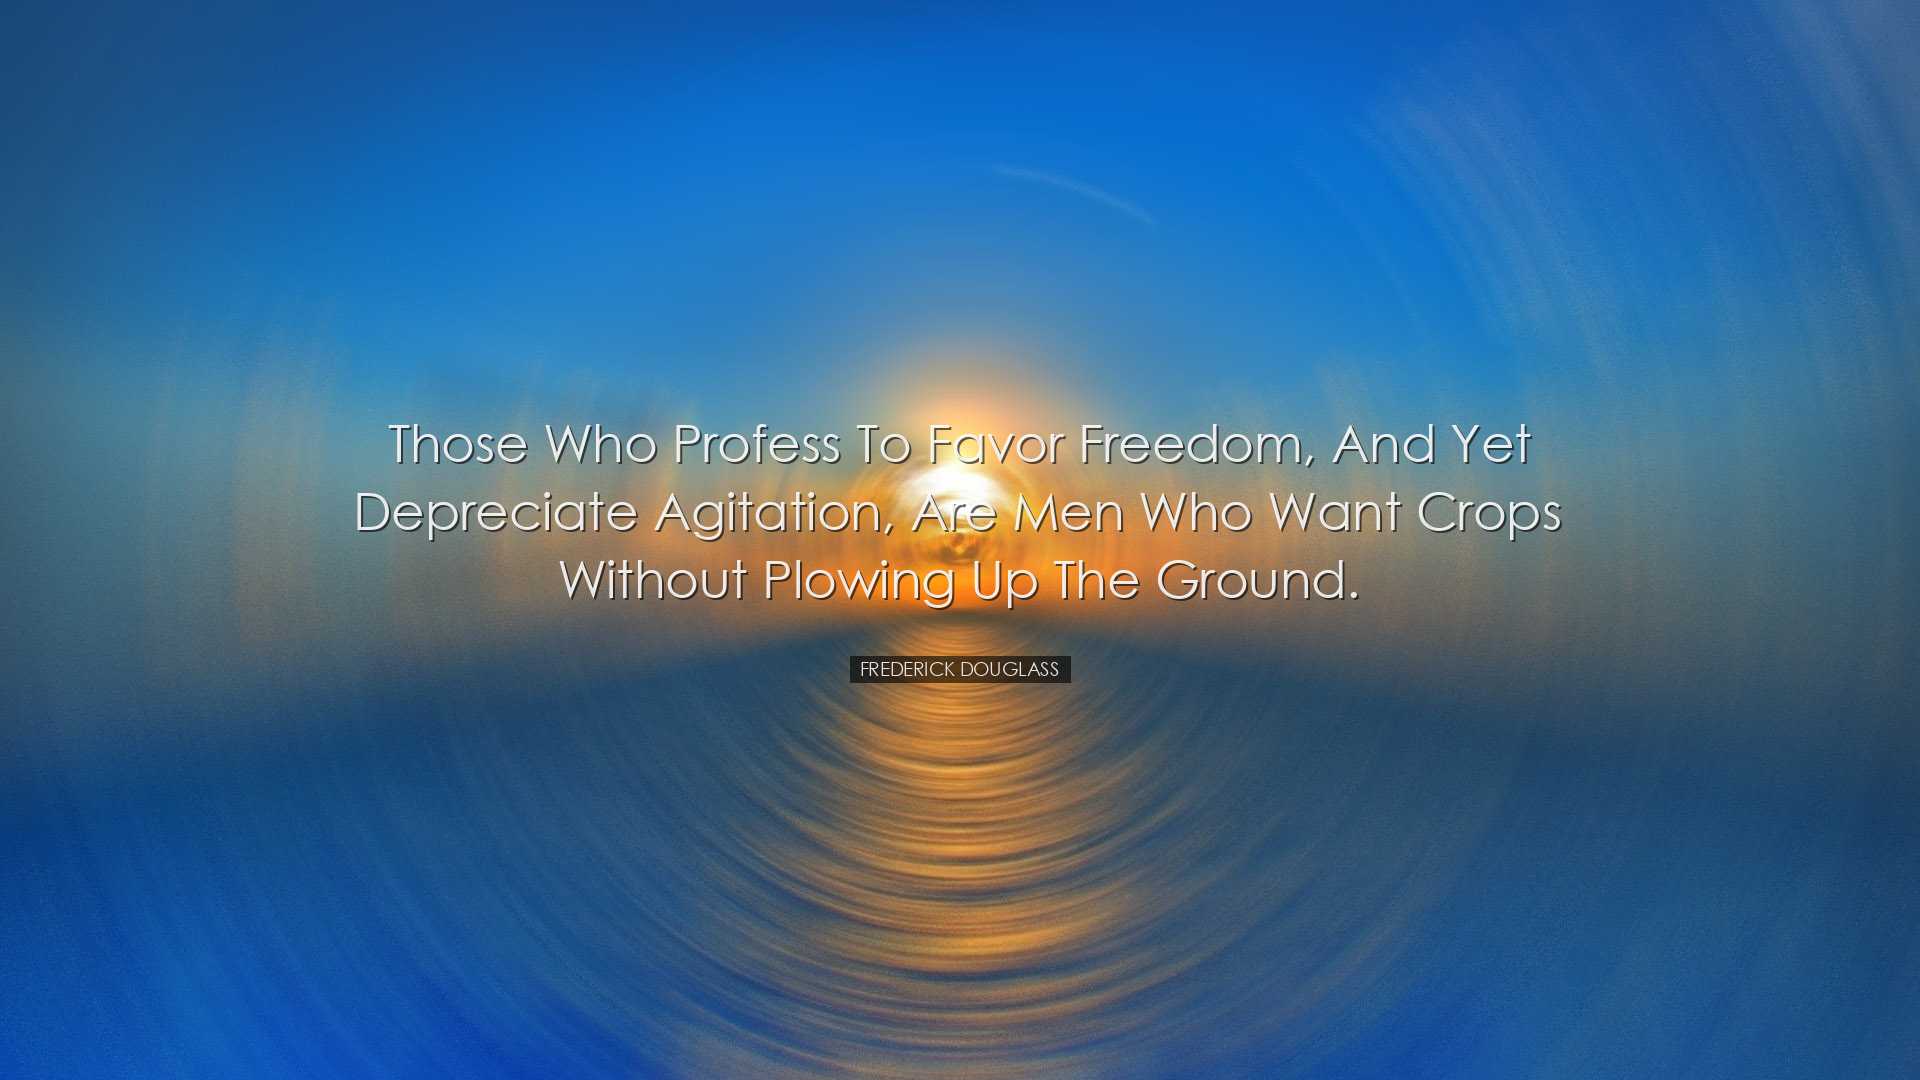 Those who profess to favor freedom, and yet depreciate agitation,